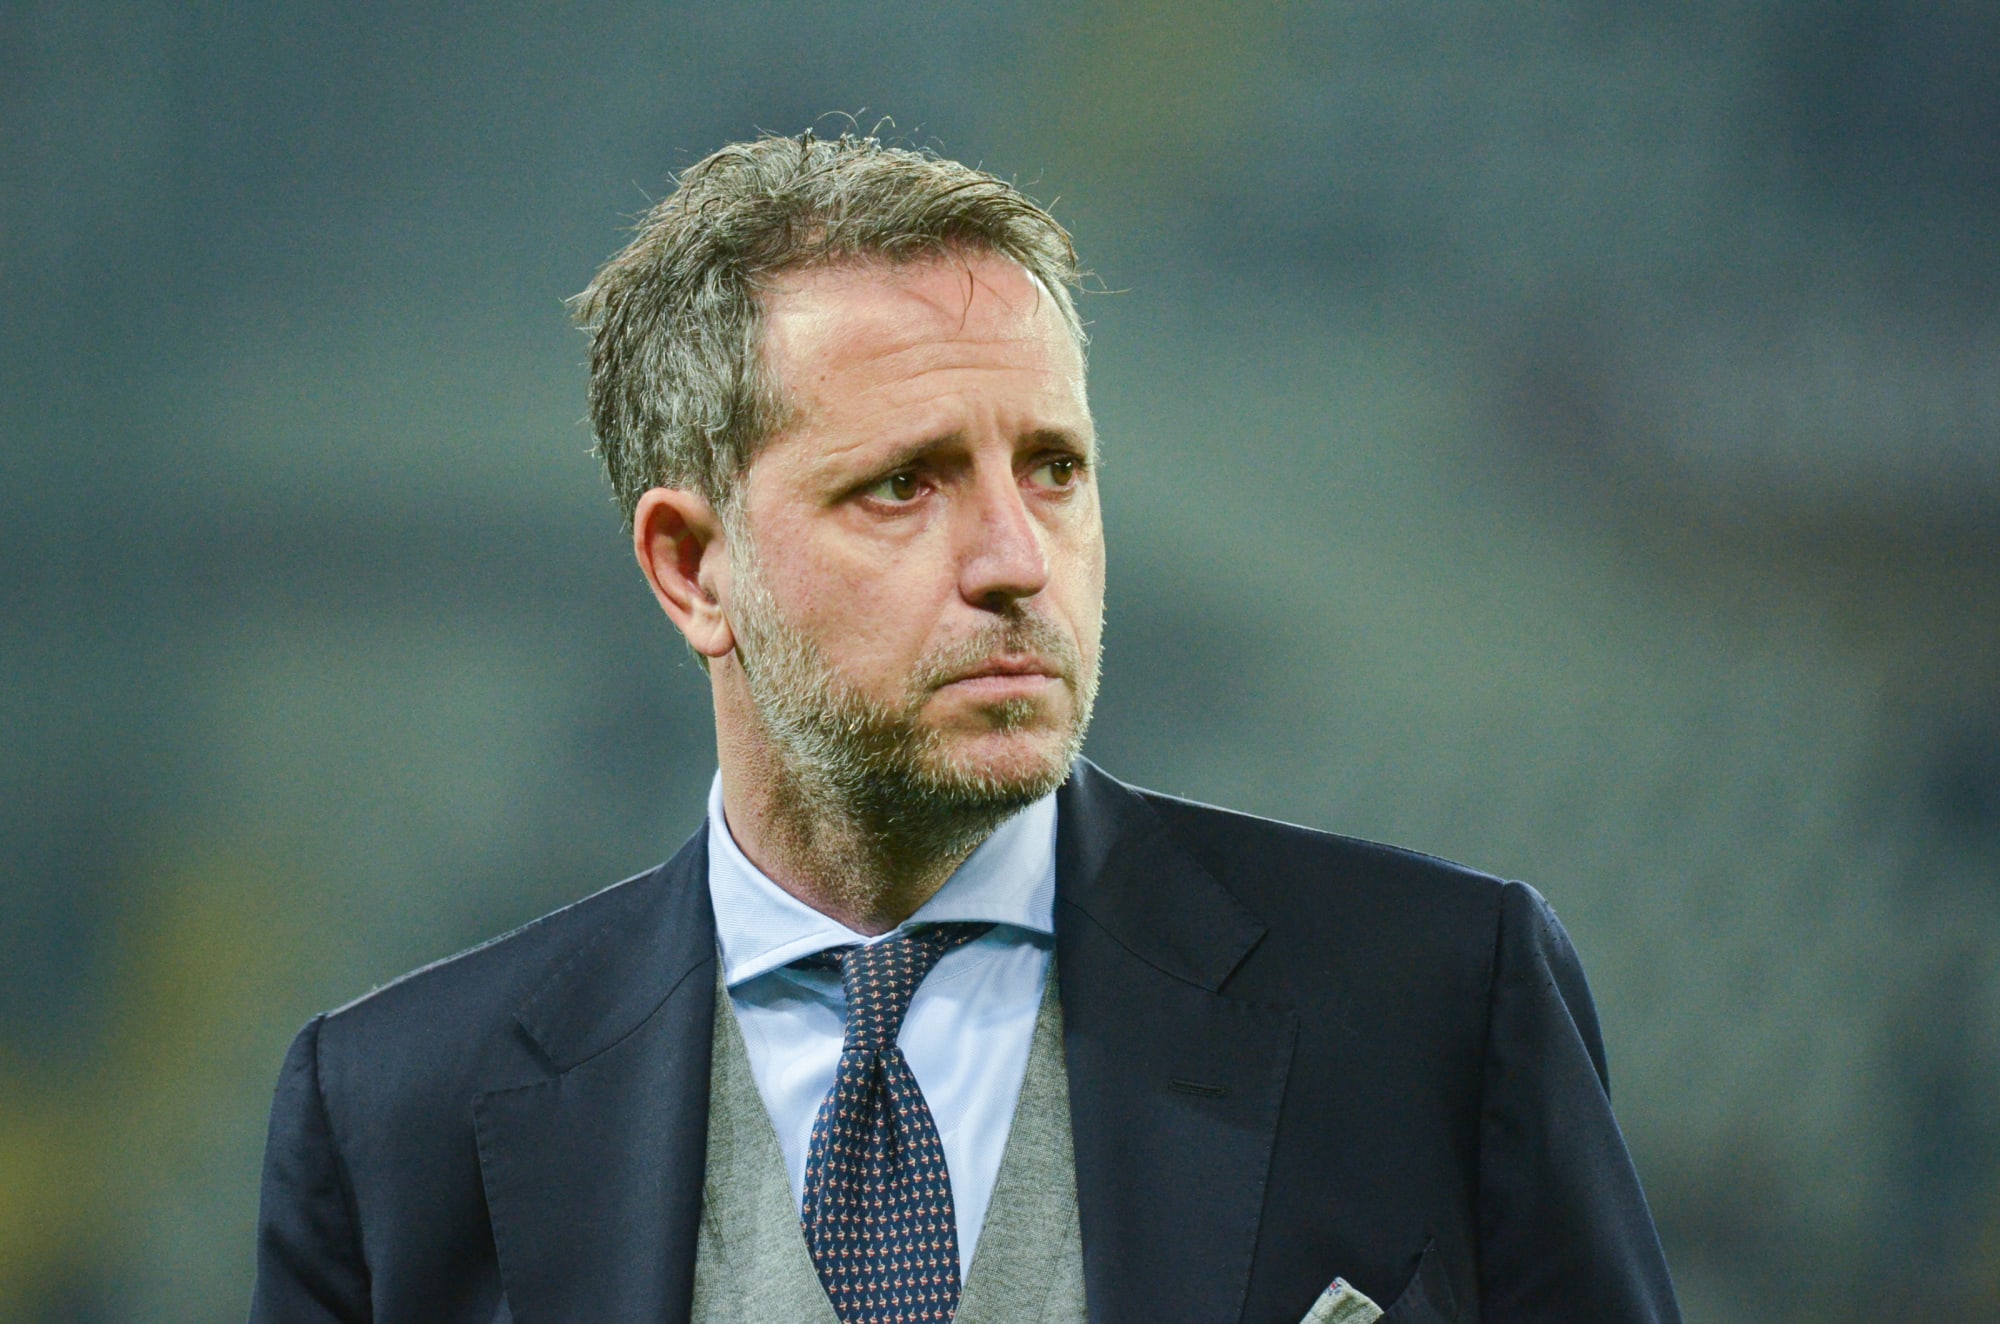 Backers, critics two schools of thought on Paratici’s first full transfer period